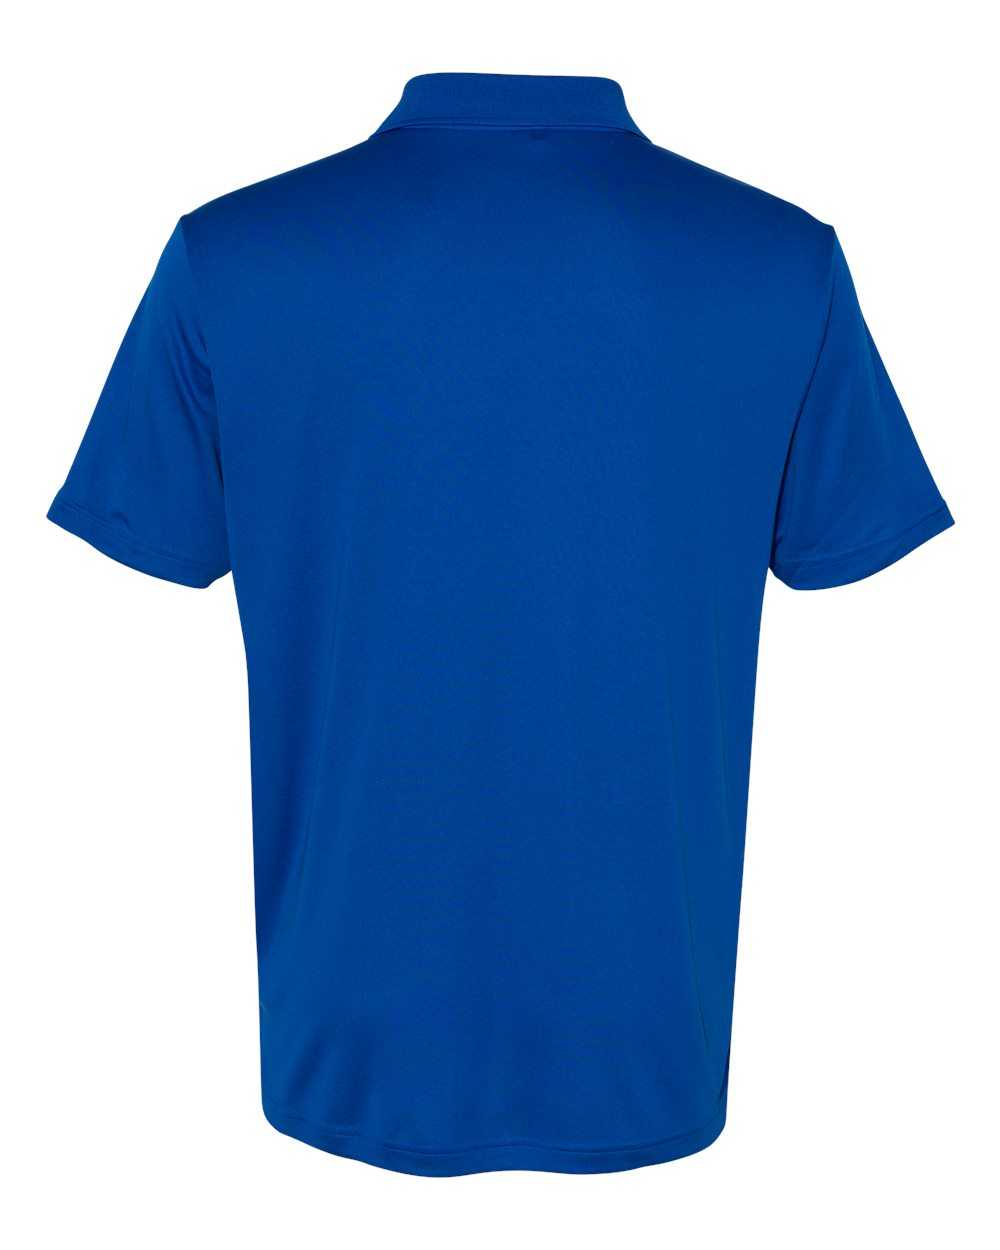 Adidas A230 Performance Sport Shirt - Collegiate Royal - HIT a Double